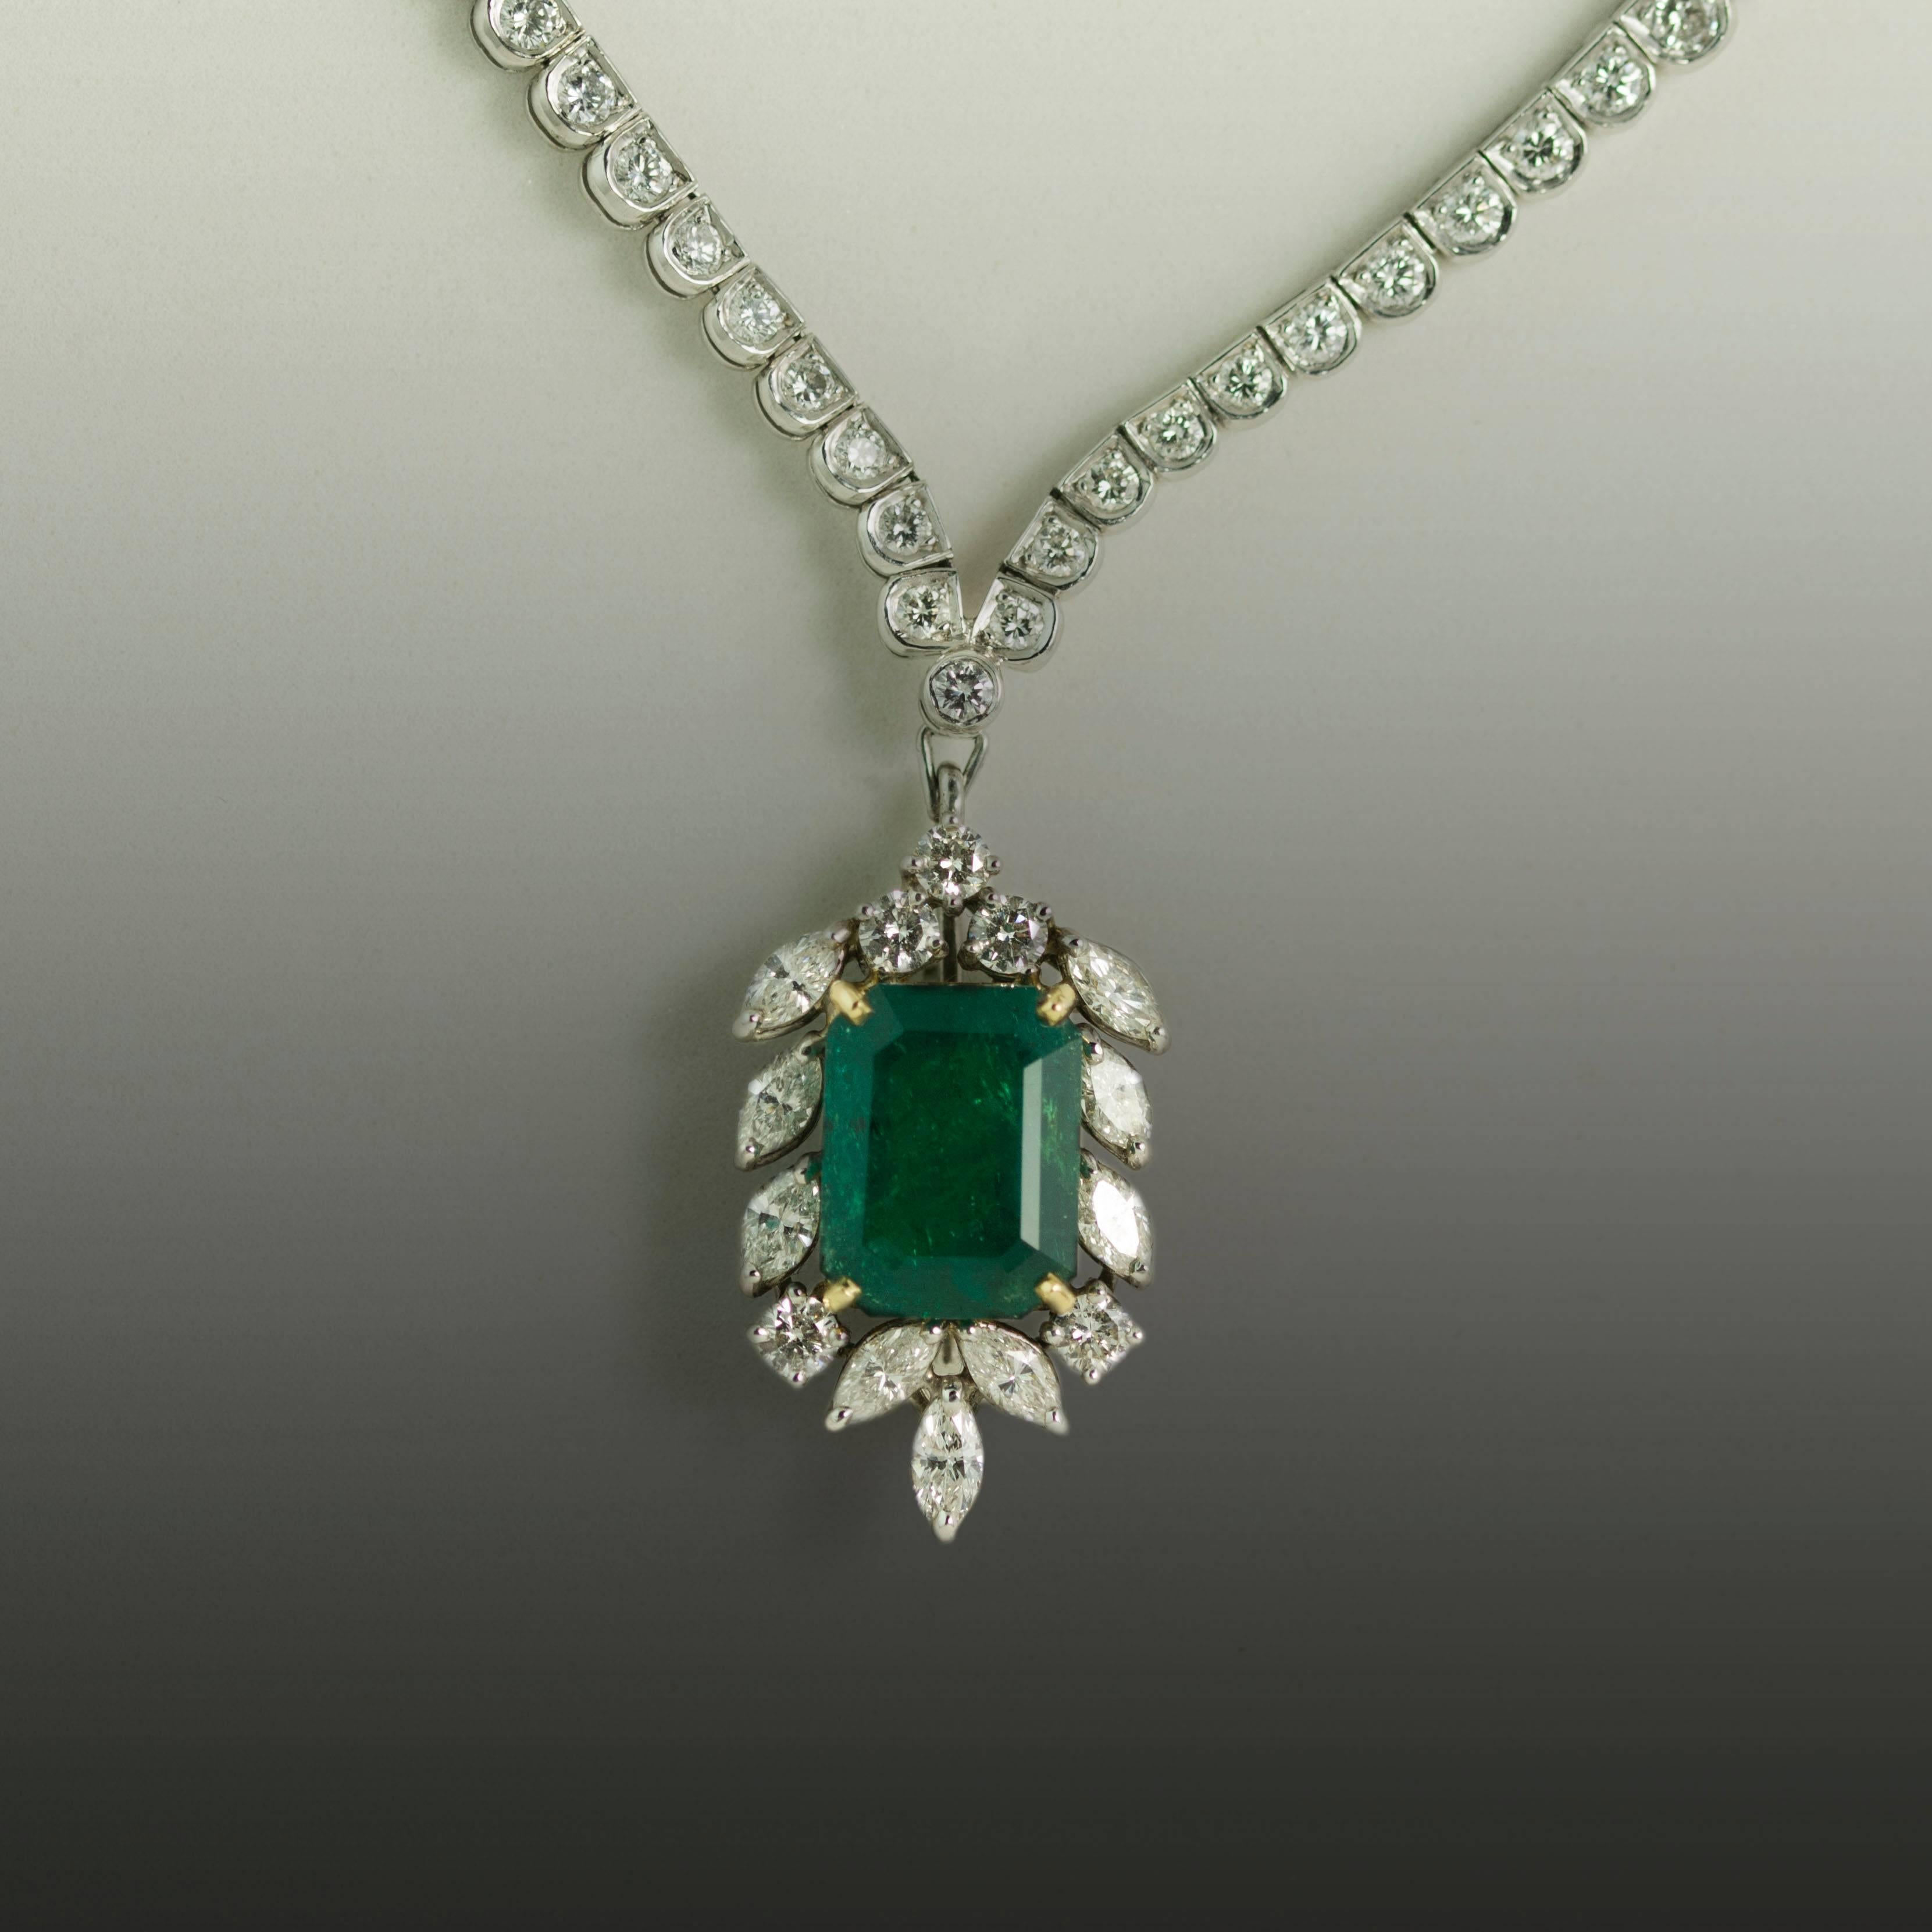 Platinum Necklace circa 1950's with one "detachable" Colombian Emerald weighing approximately 5.60 carats and marquis cut and round diamonds weighing approximately 7.50 carats.